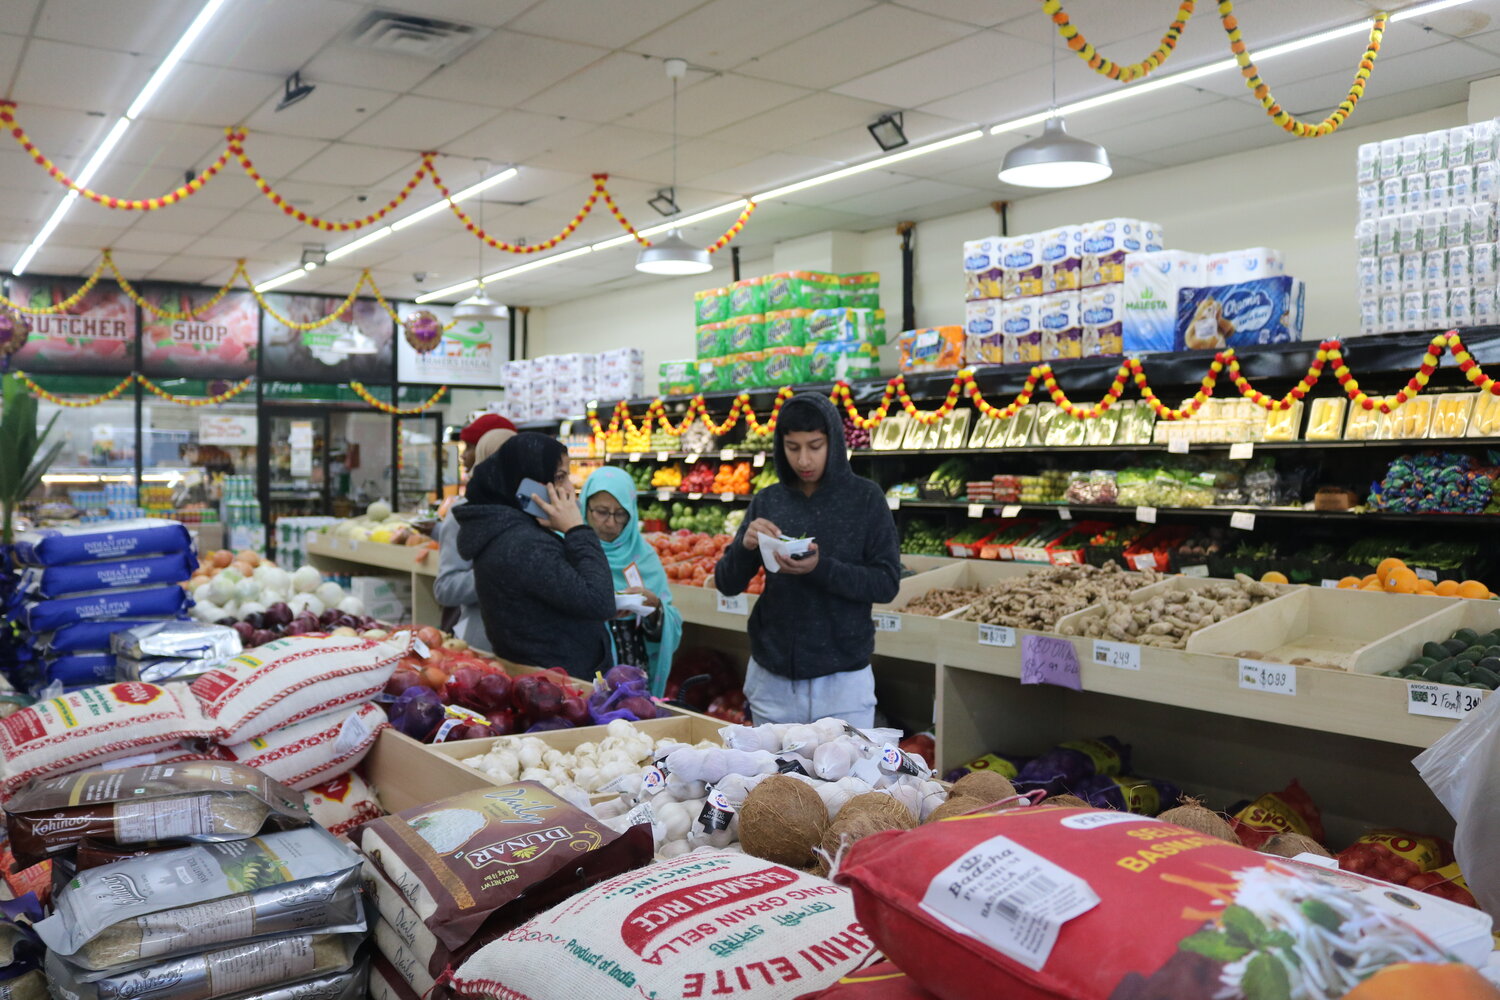 Central Food Market recently embarked on the Healthy Corner Store initiative to enhance its fresh produce display to encourage customers to buy healthy foods.